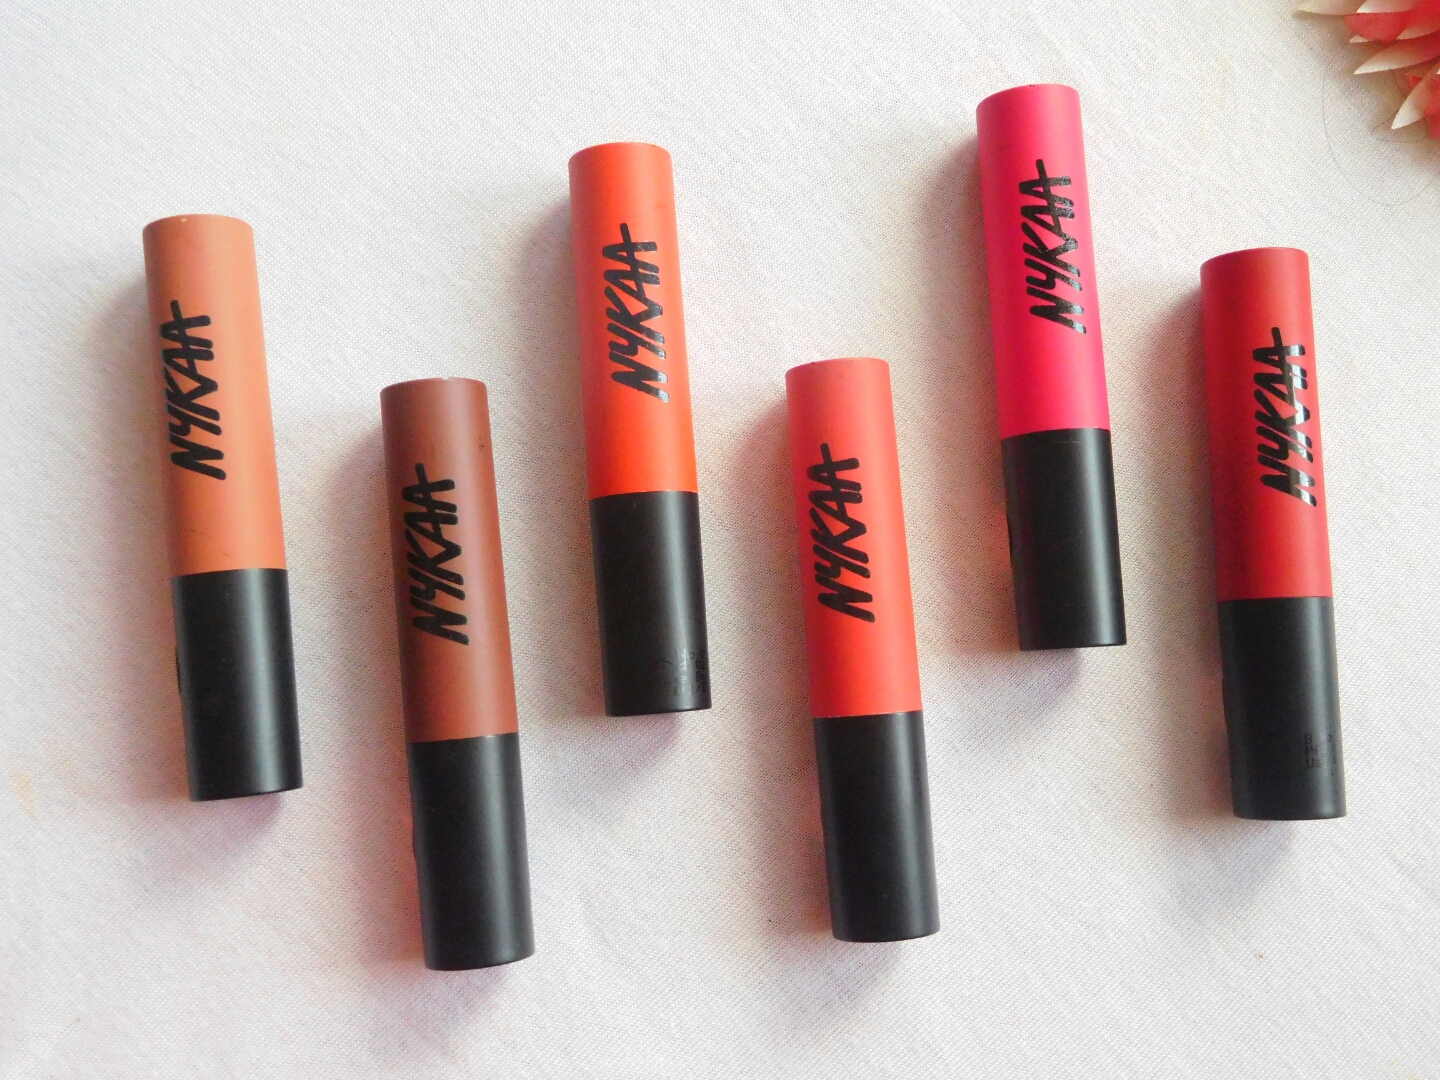 Nykaa Paintstix Lipsticks Review & Swatches - All Shades 